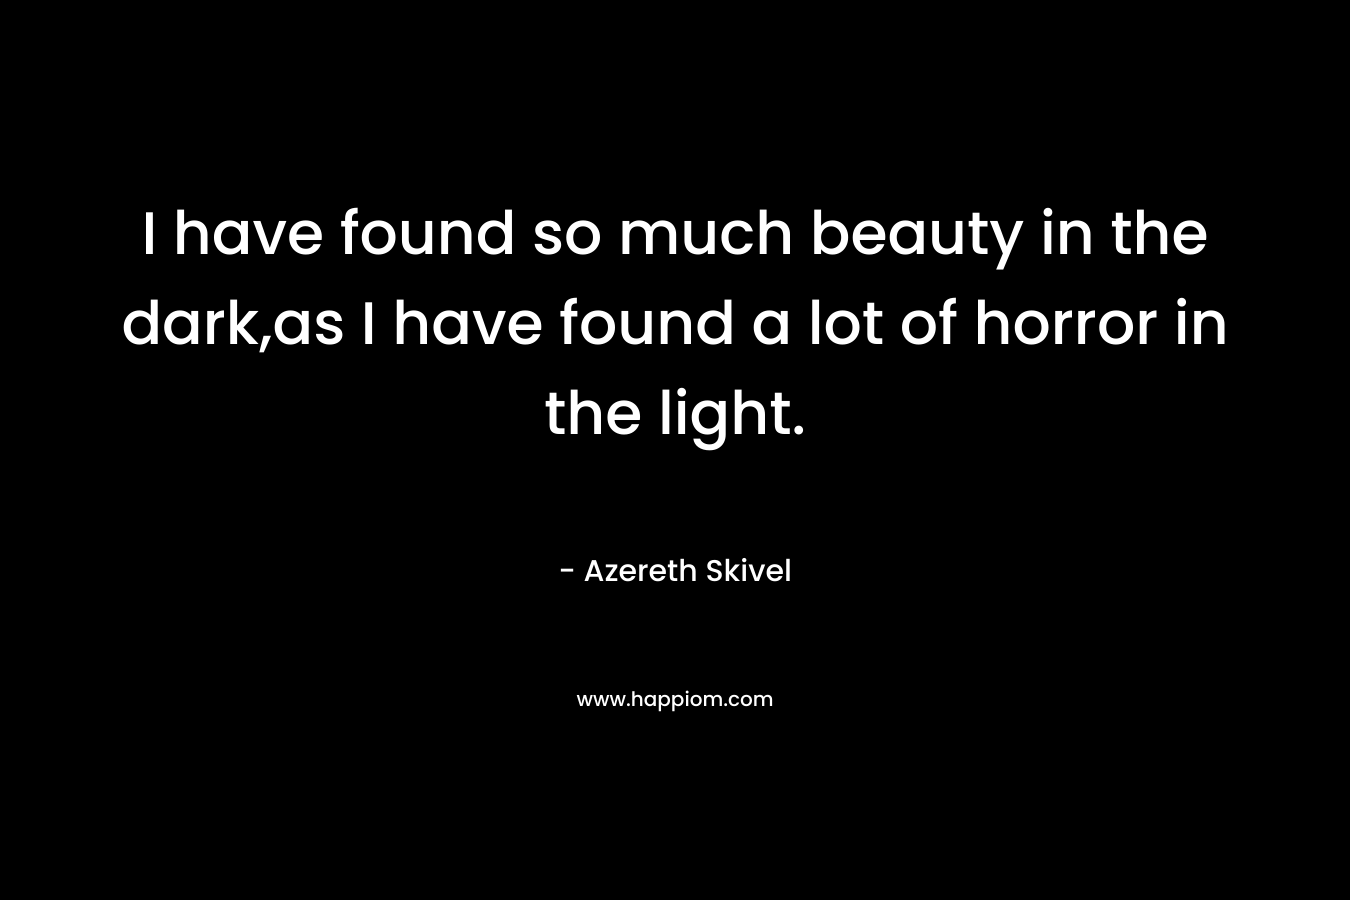 I have found so much beauty in the dark,as I have found a lot of horror in the light.